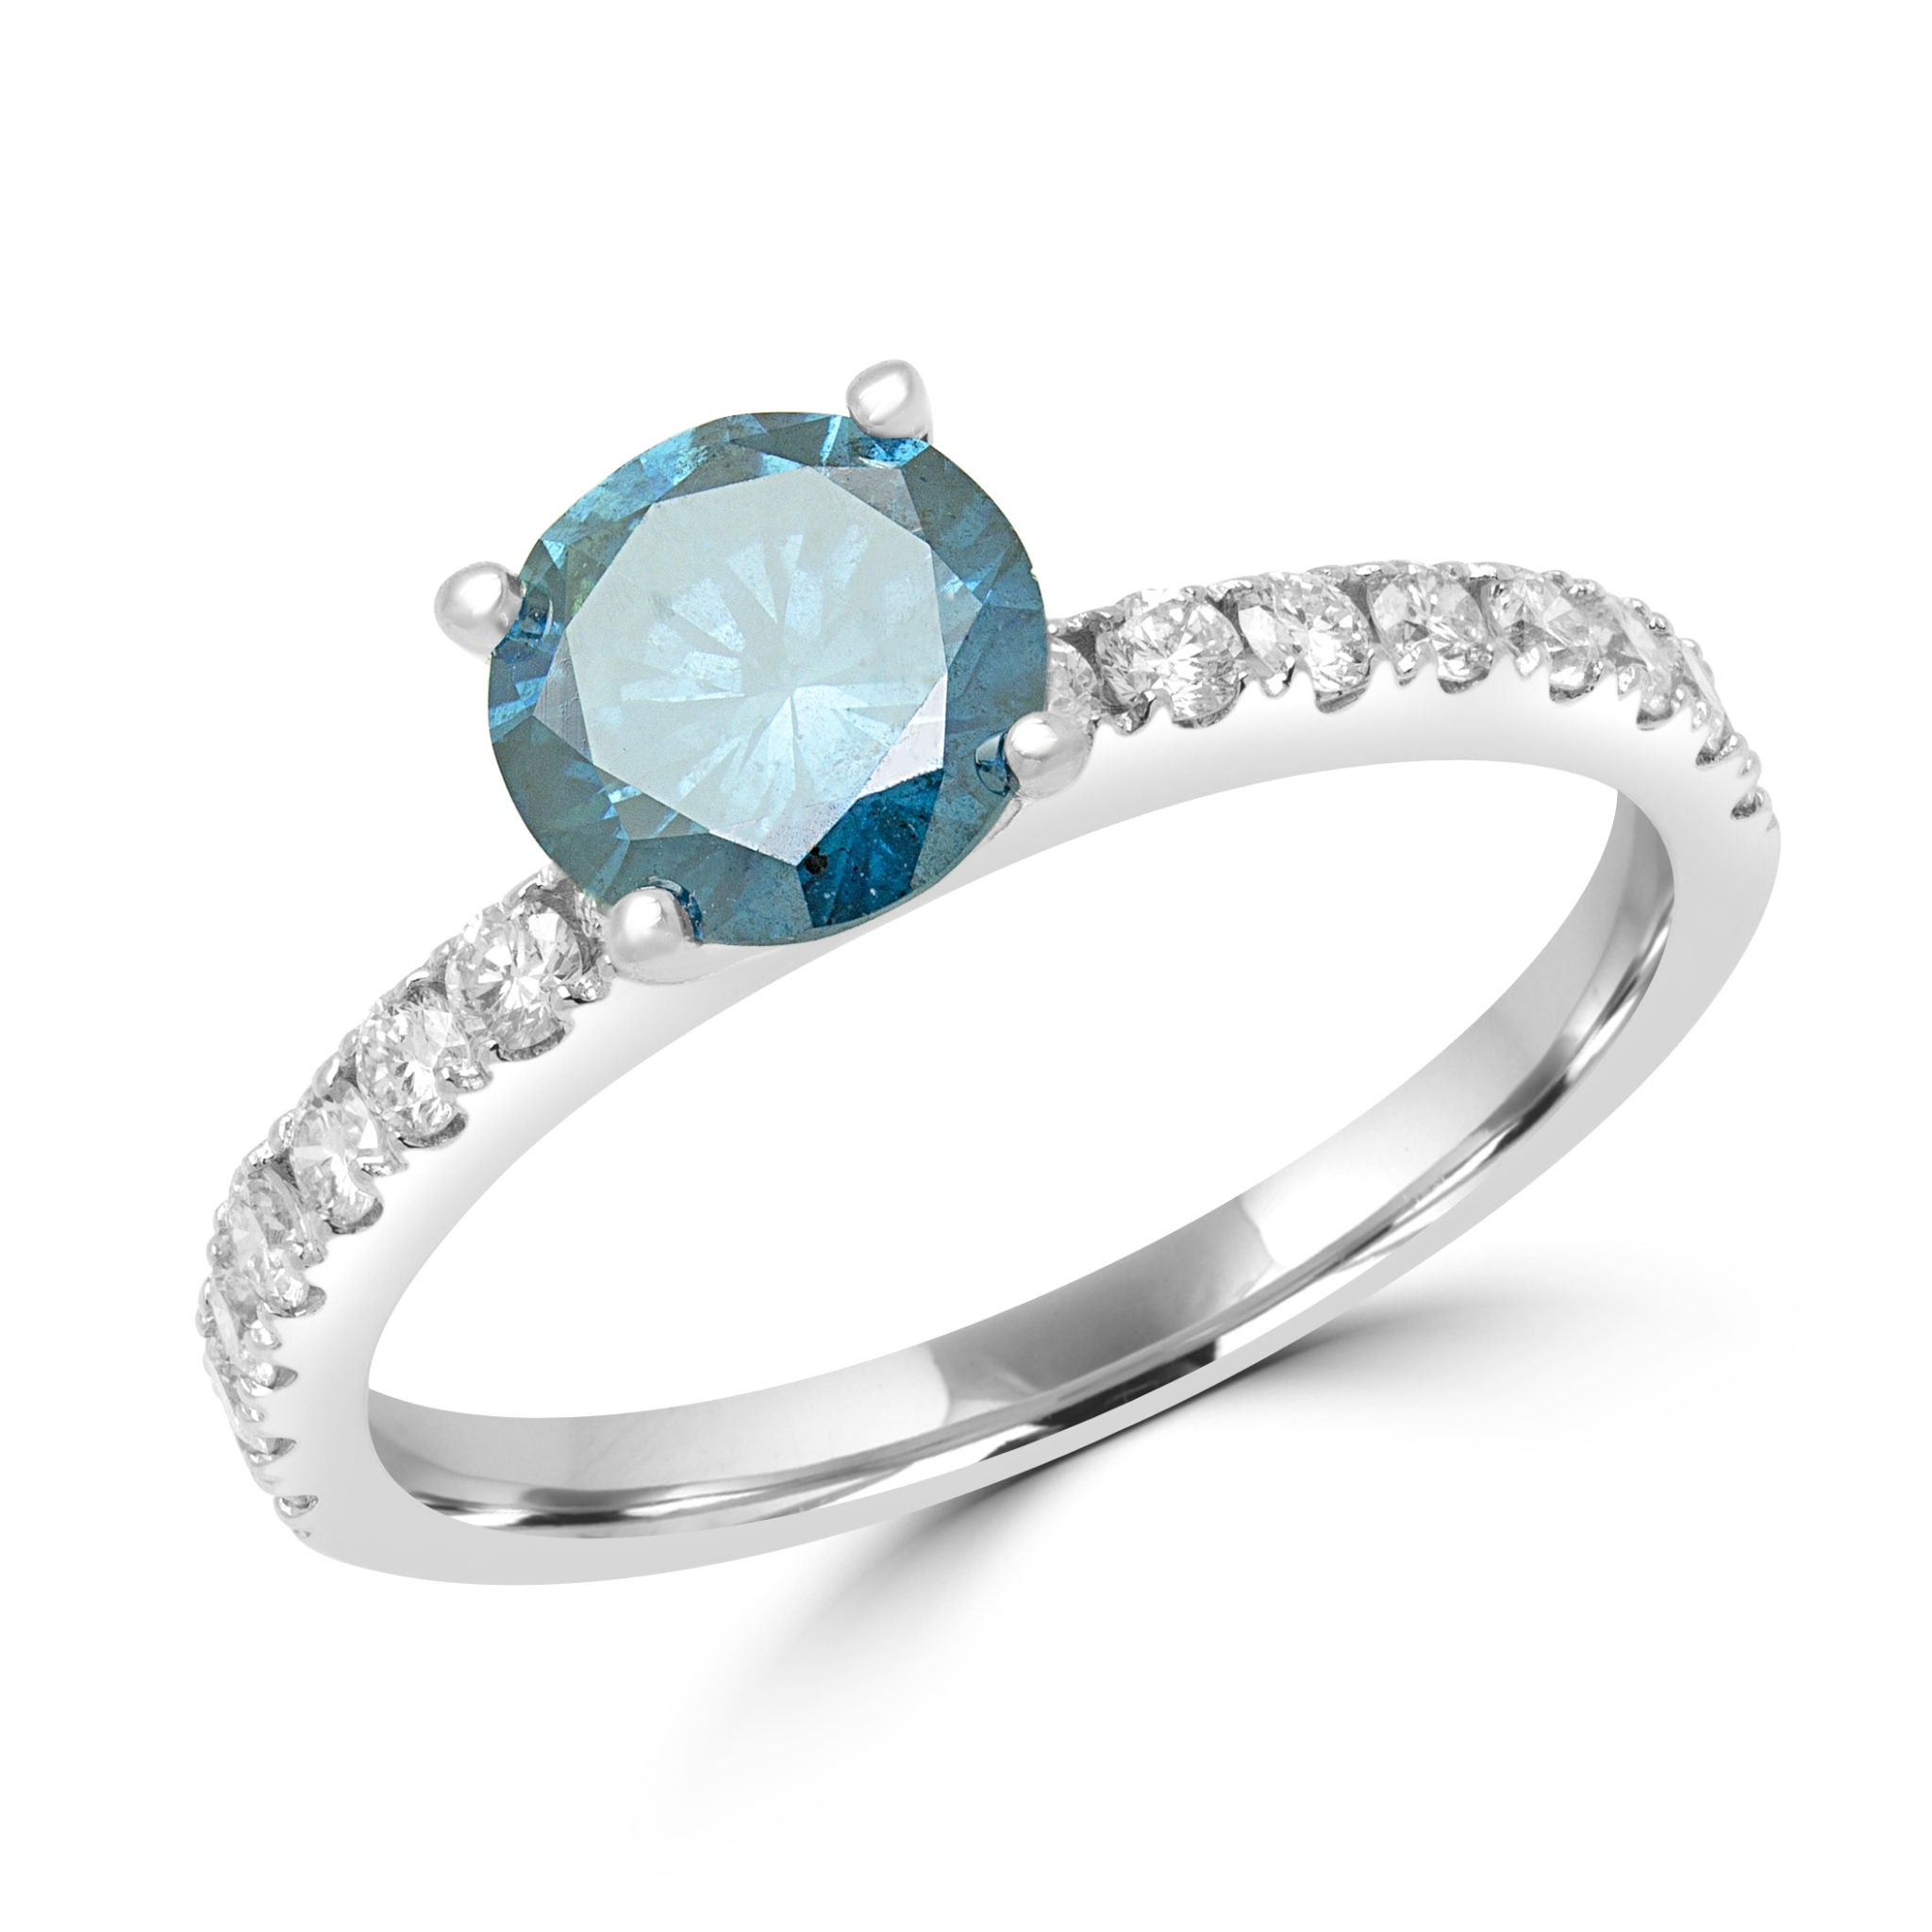 Enhanced blue solitaire ring 1.40 (ctw) in 14k white gold